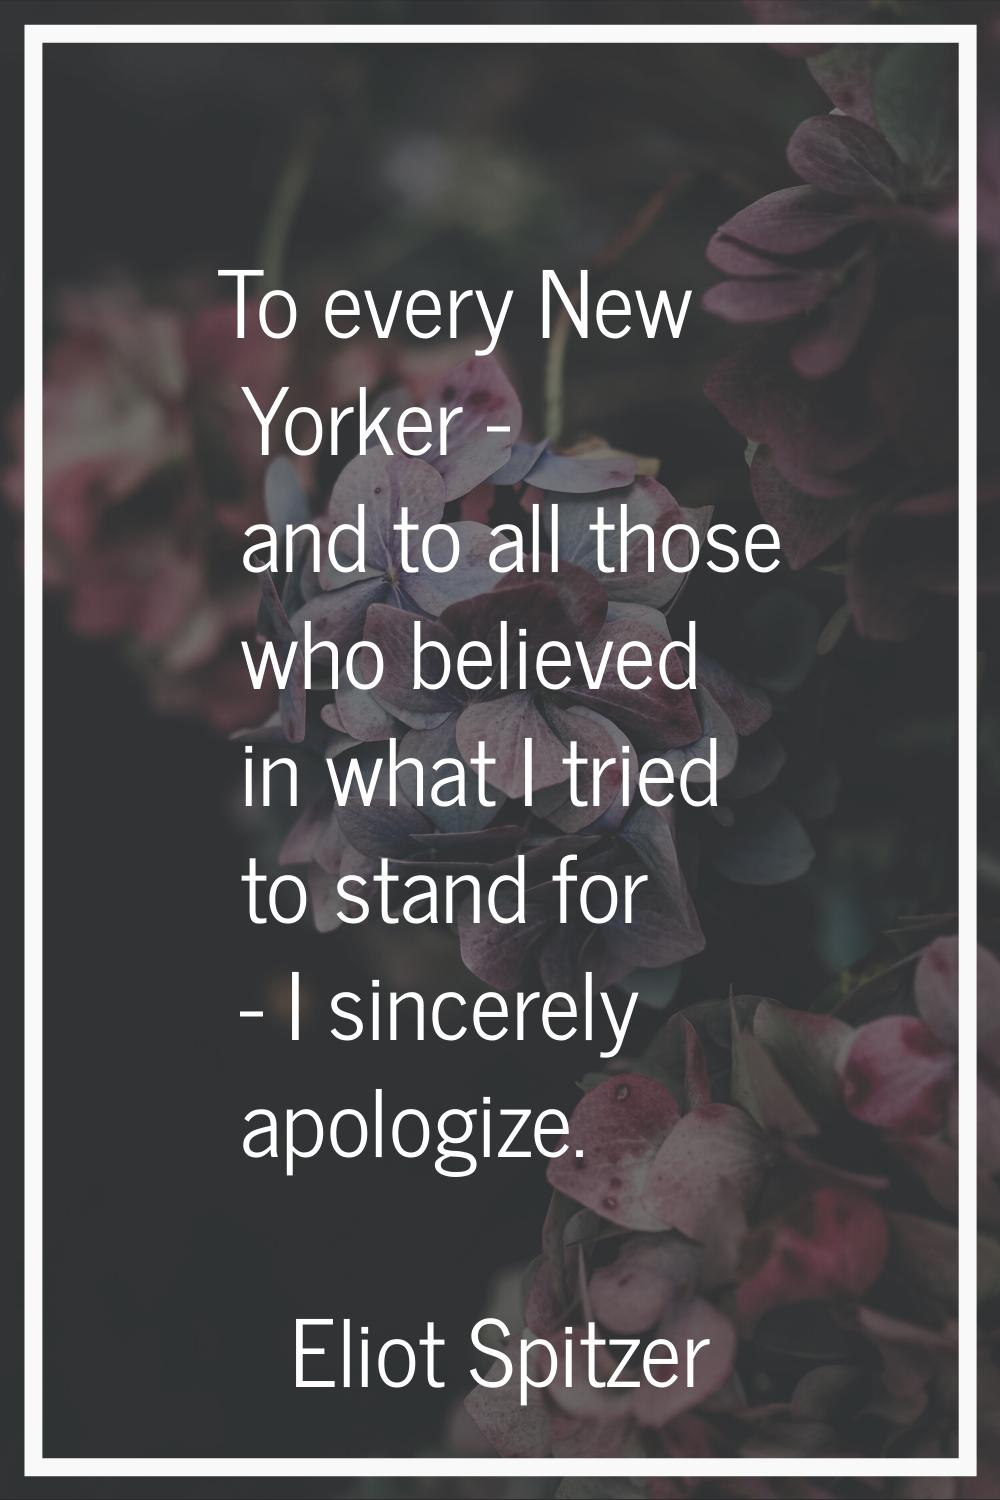 To every New Yorker - and to all those who believed in what I tried to stand for - I sincerely apol